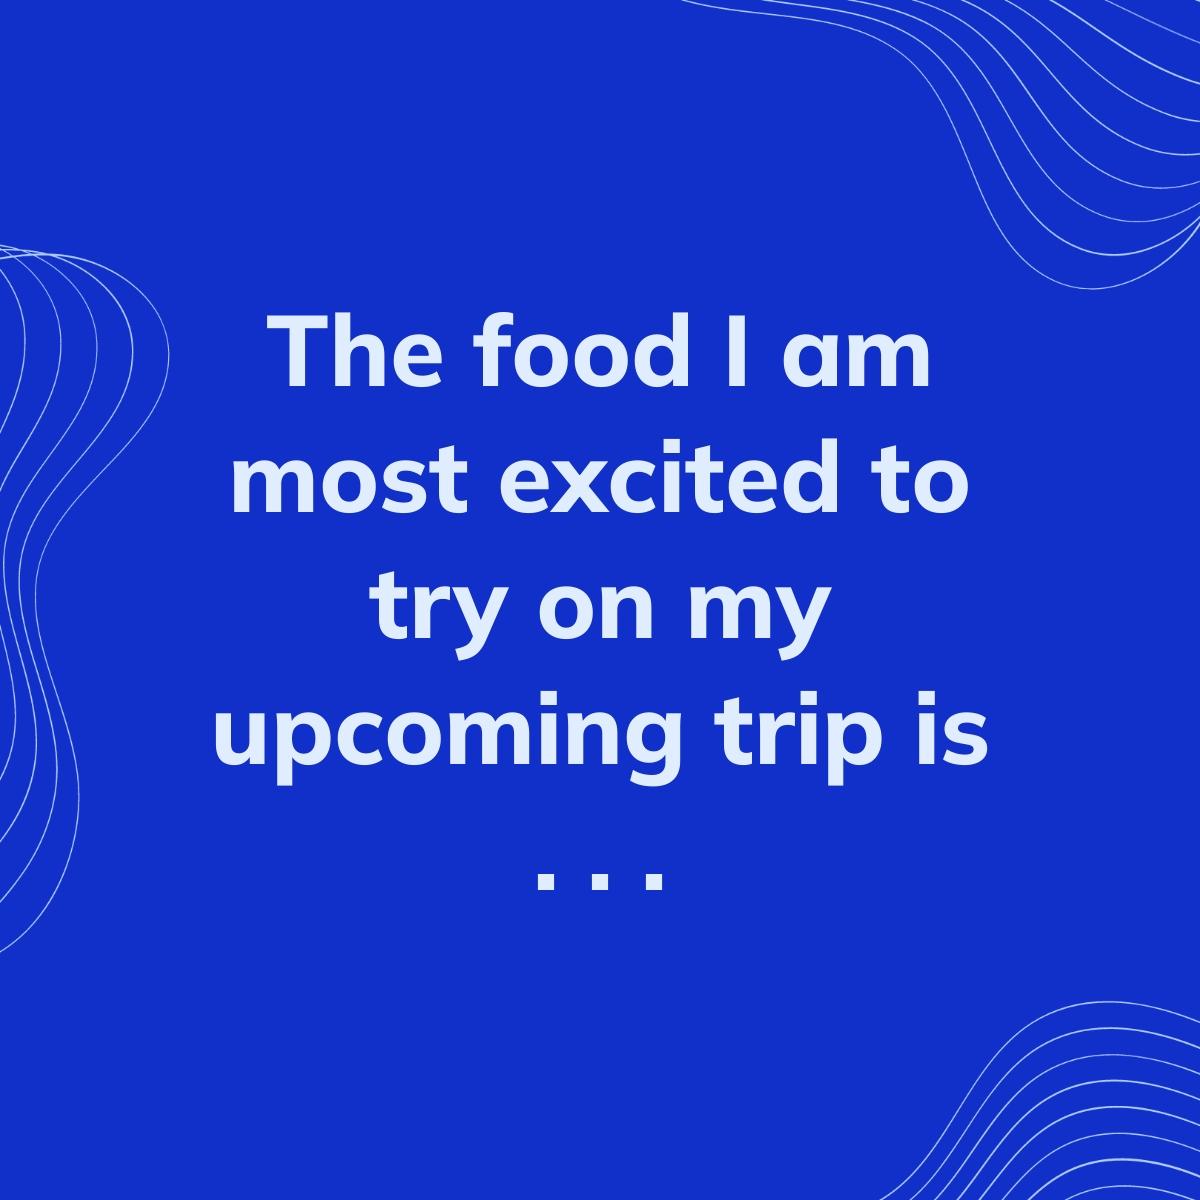 Journal Prompt: The food I am most excited to try on my upcoming trip is . . .